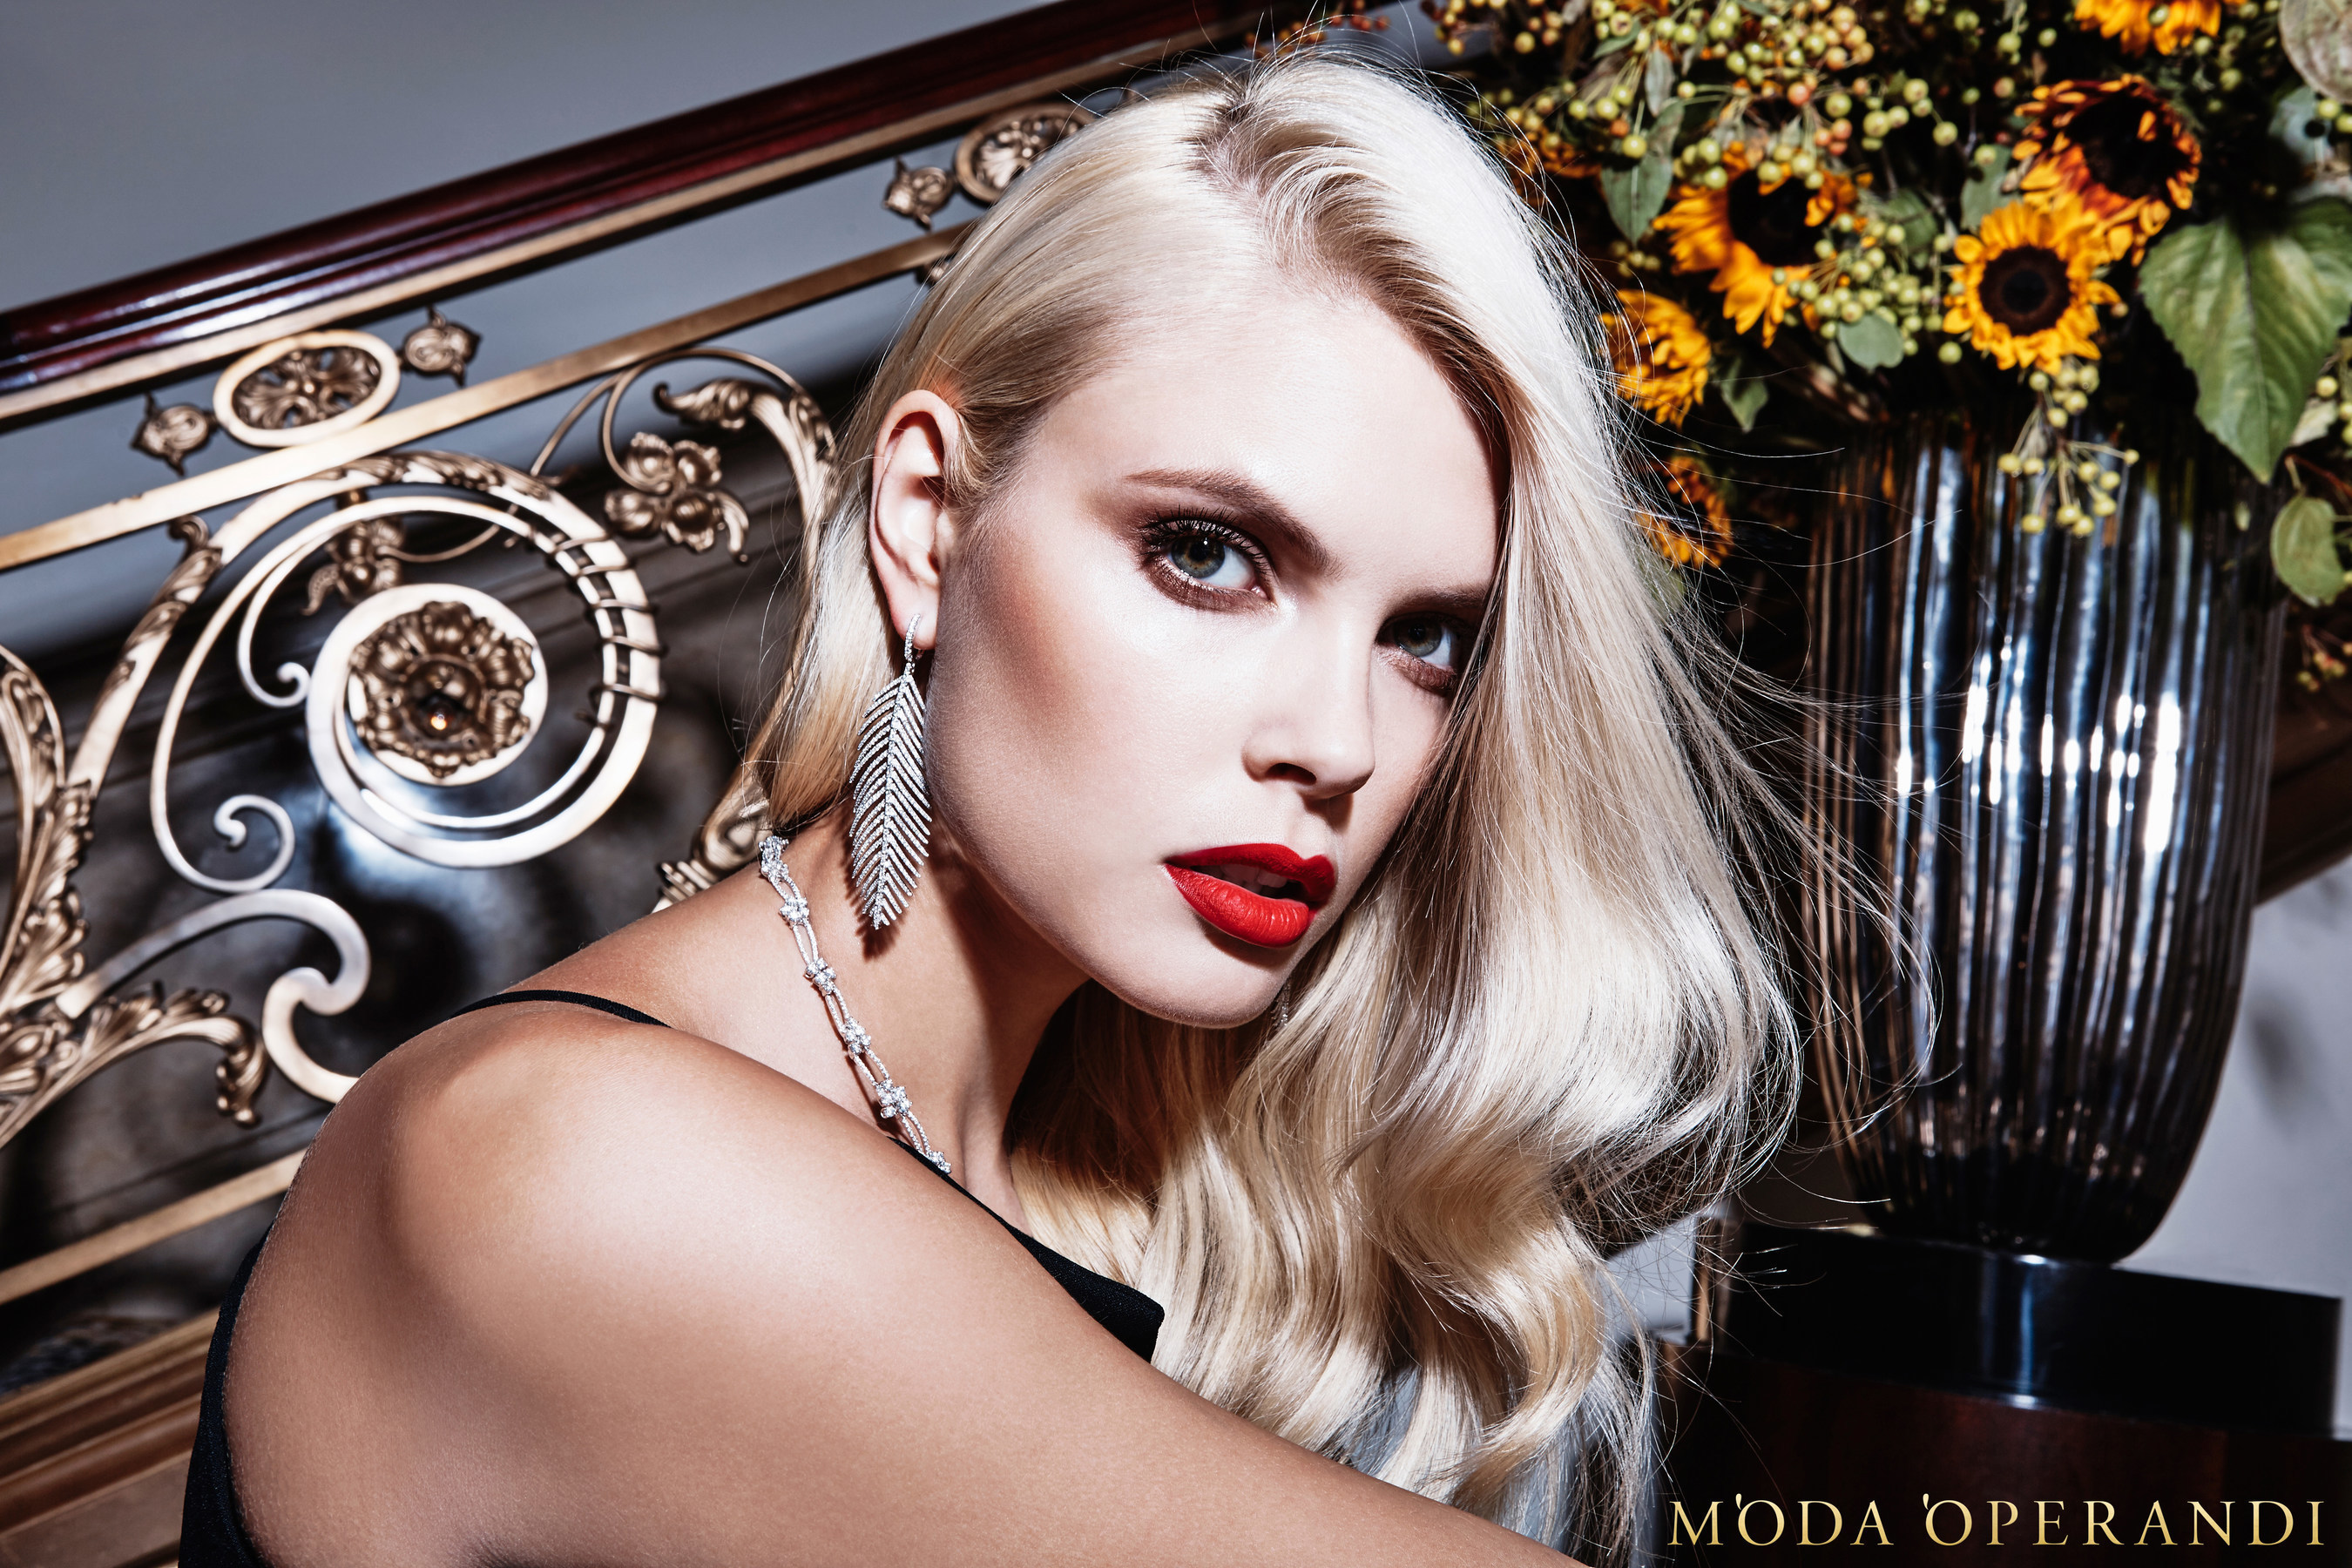 The 2015 Moda Operandi Holiday Collection campaign photographed by Steve Hiett.